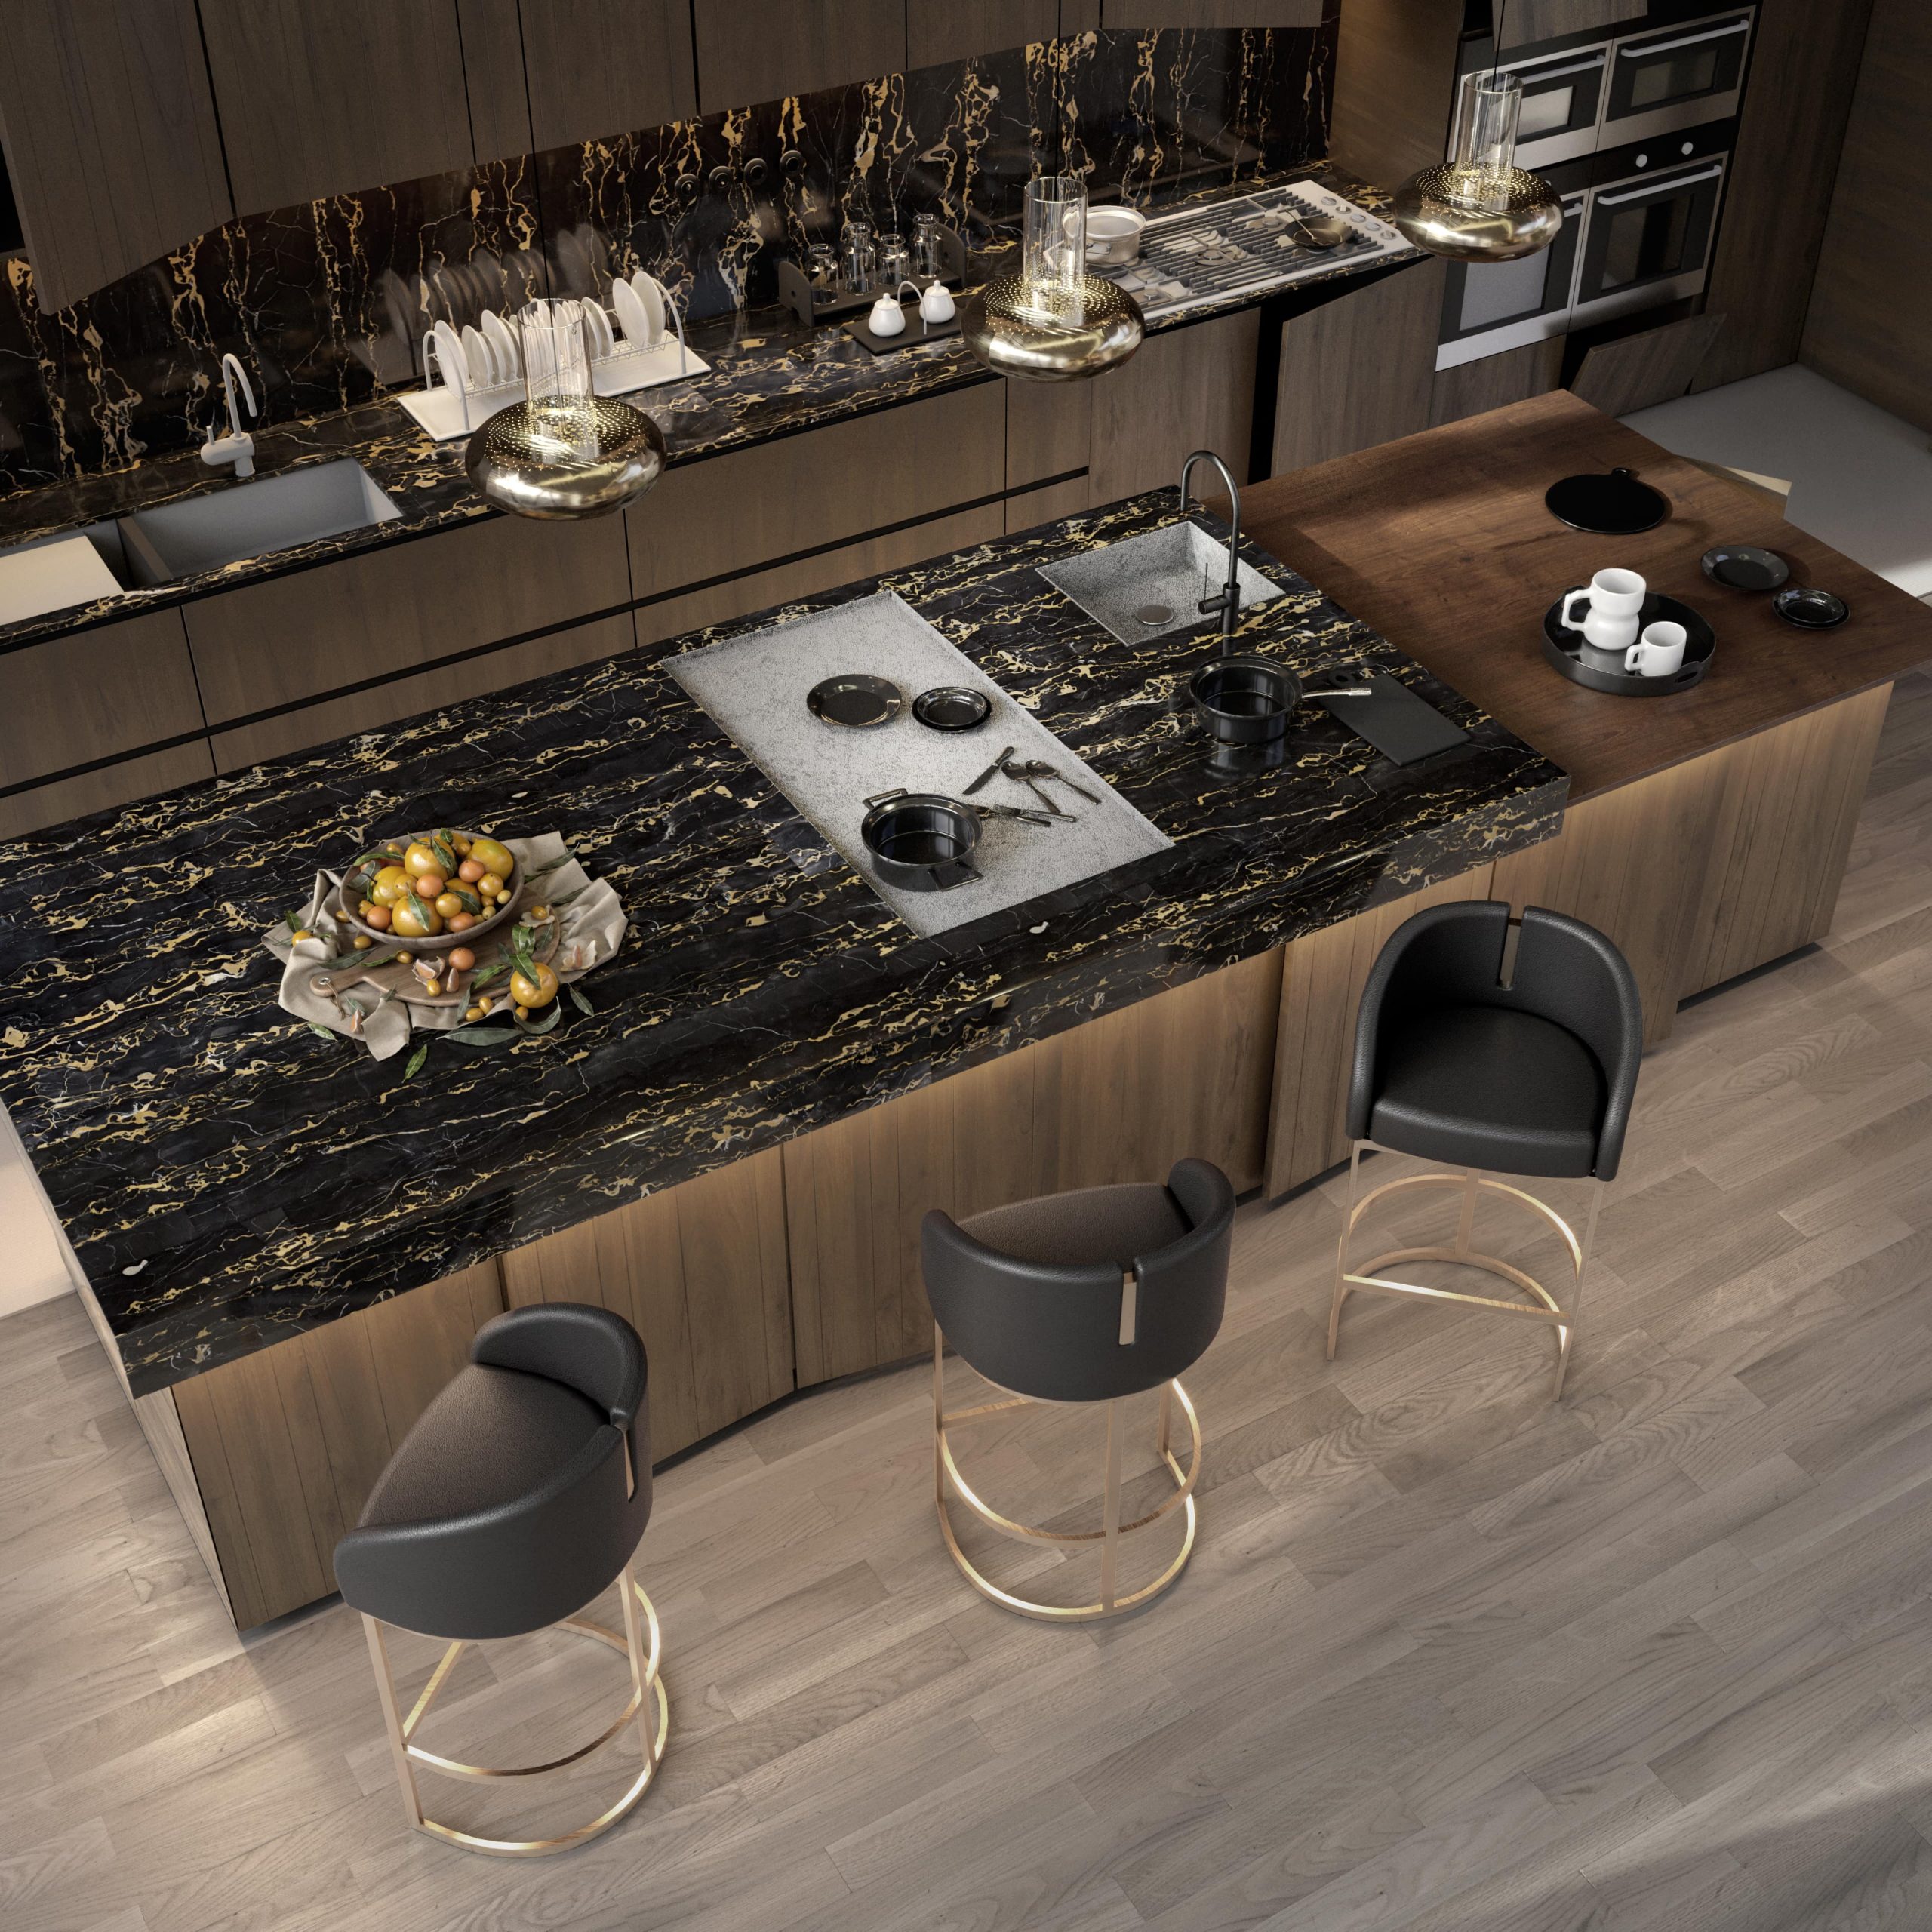 ANOTHER ANGLE OF THIS TIMELESSLY MODERN KITCHEN